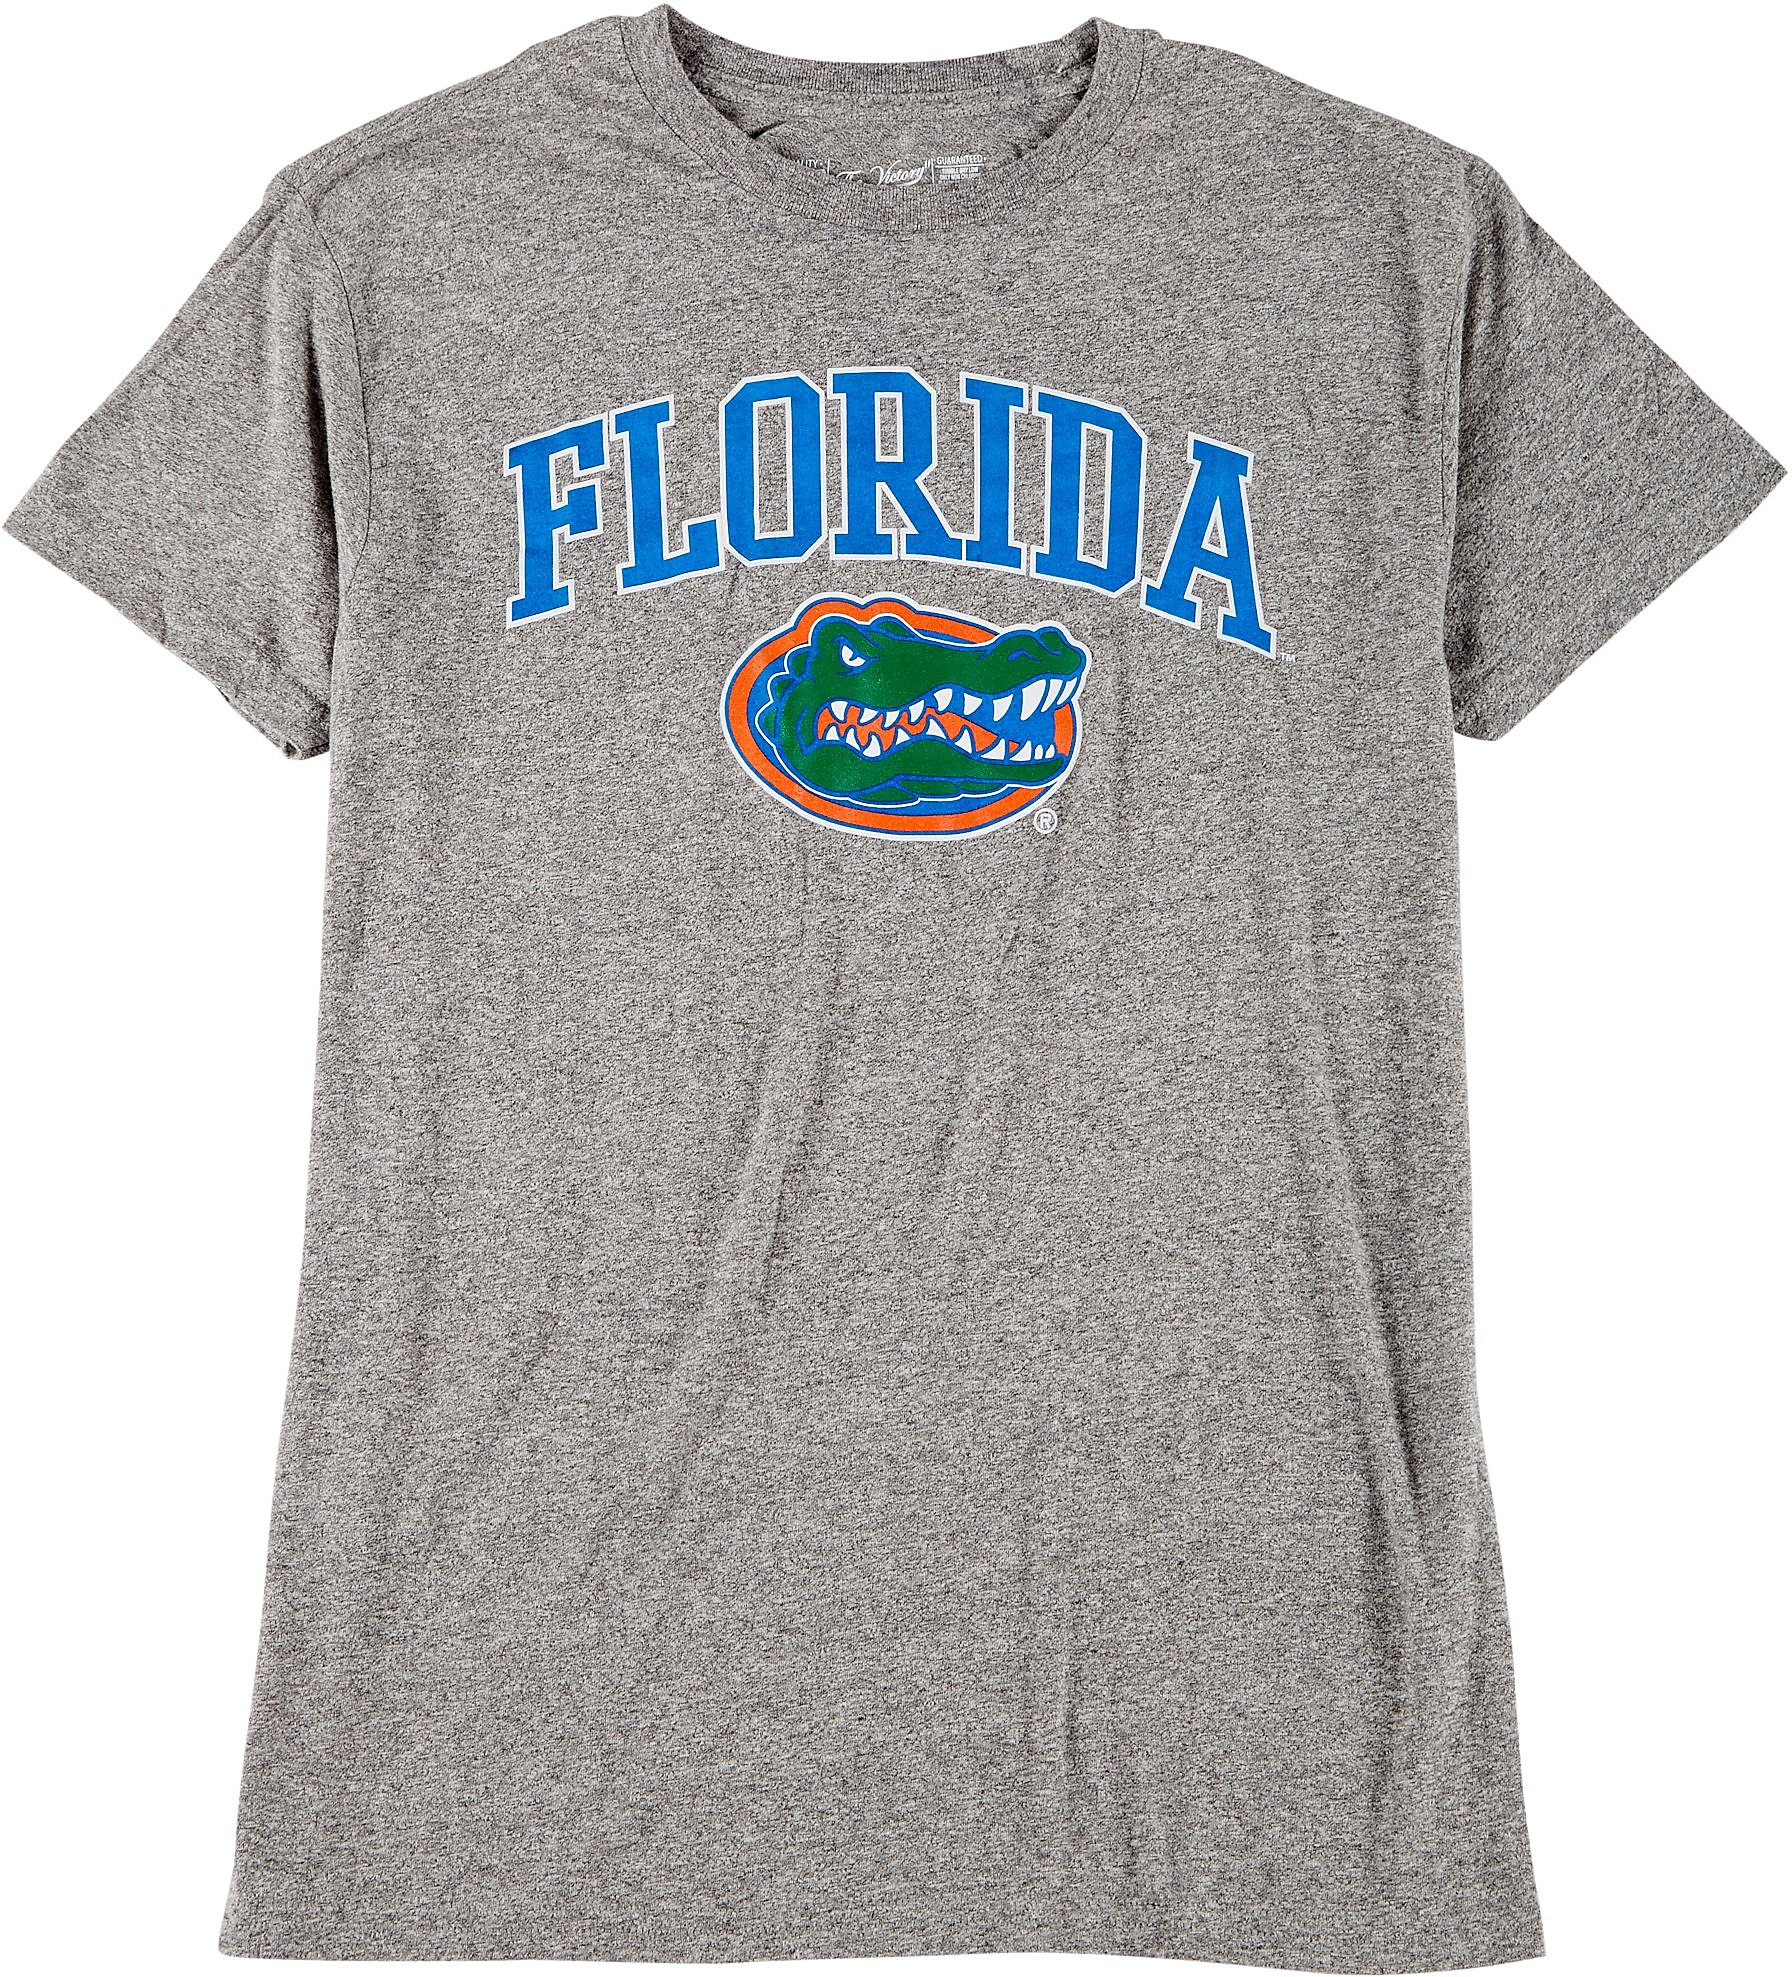 Download Florida Gators Mens Heather Crew Neck T-Shirt by Victory ...